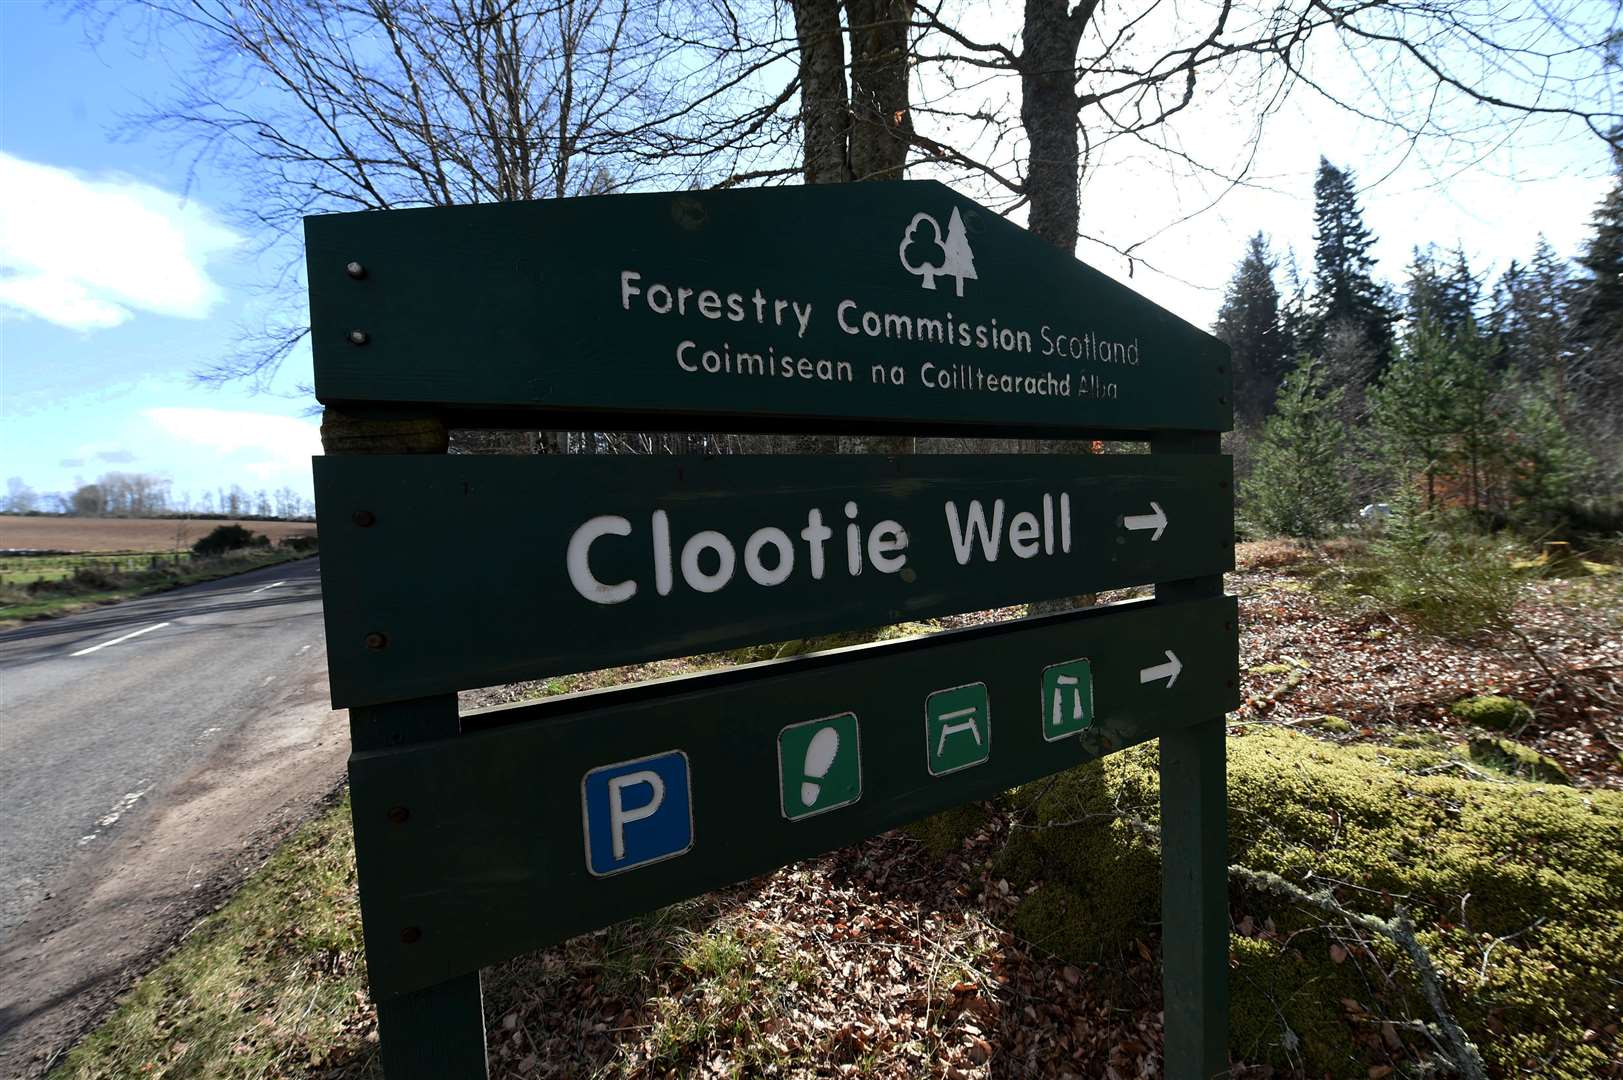 The clootie well near Munlochy remains popular.